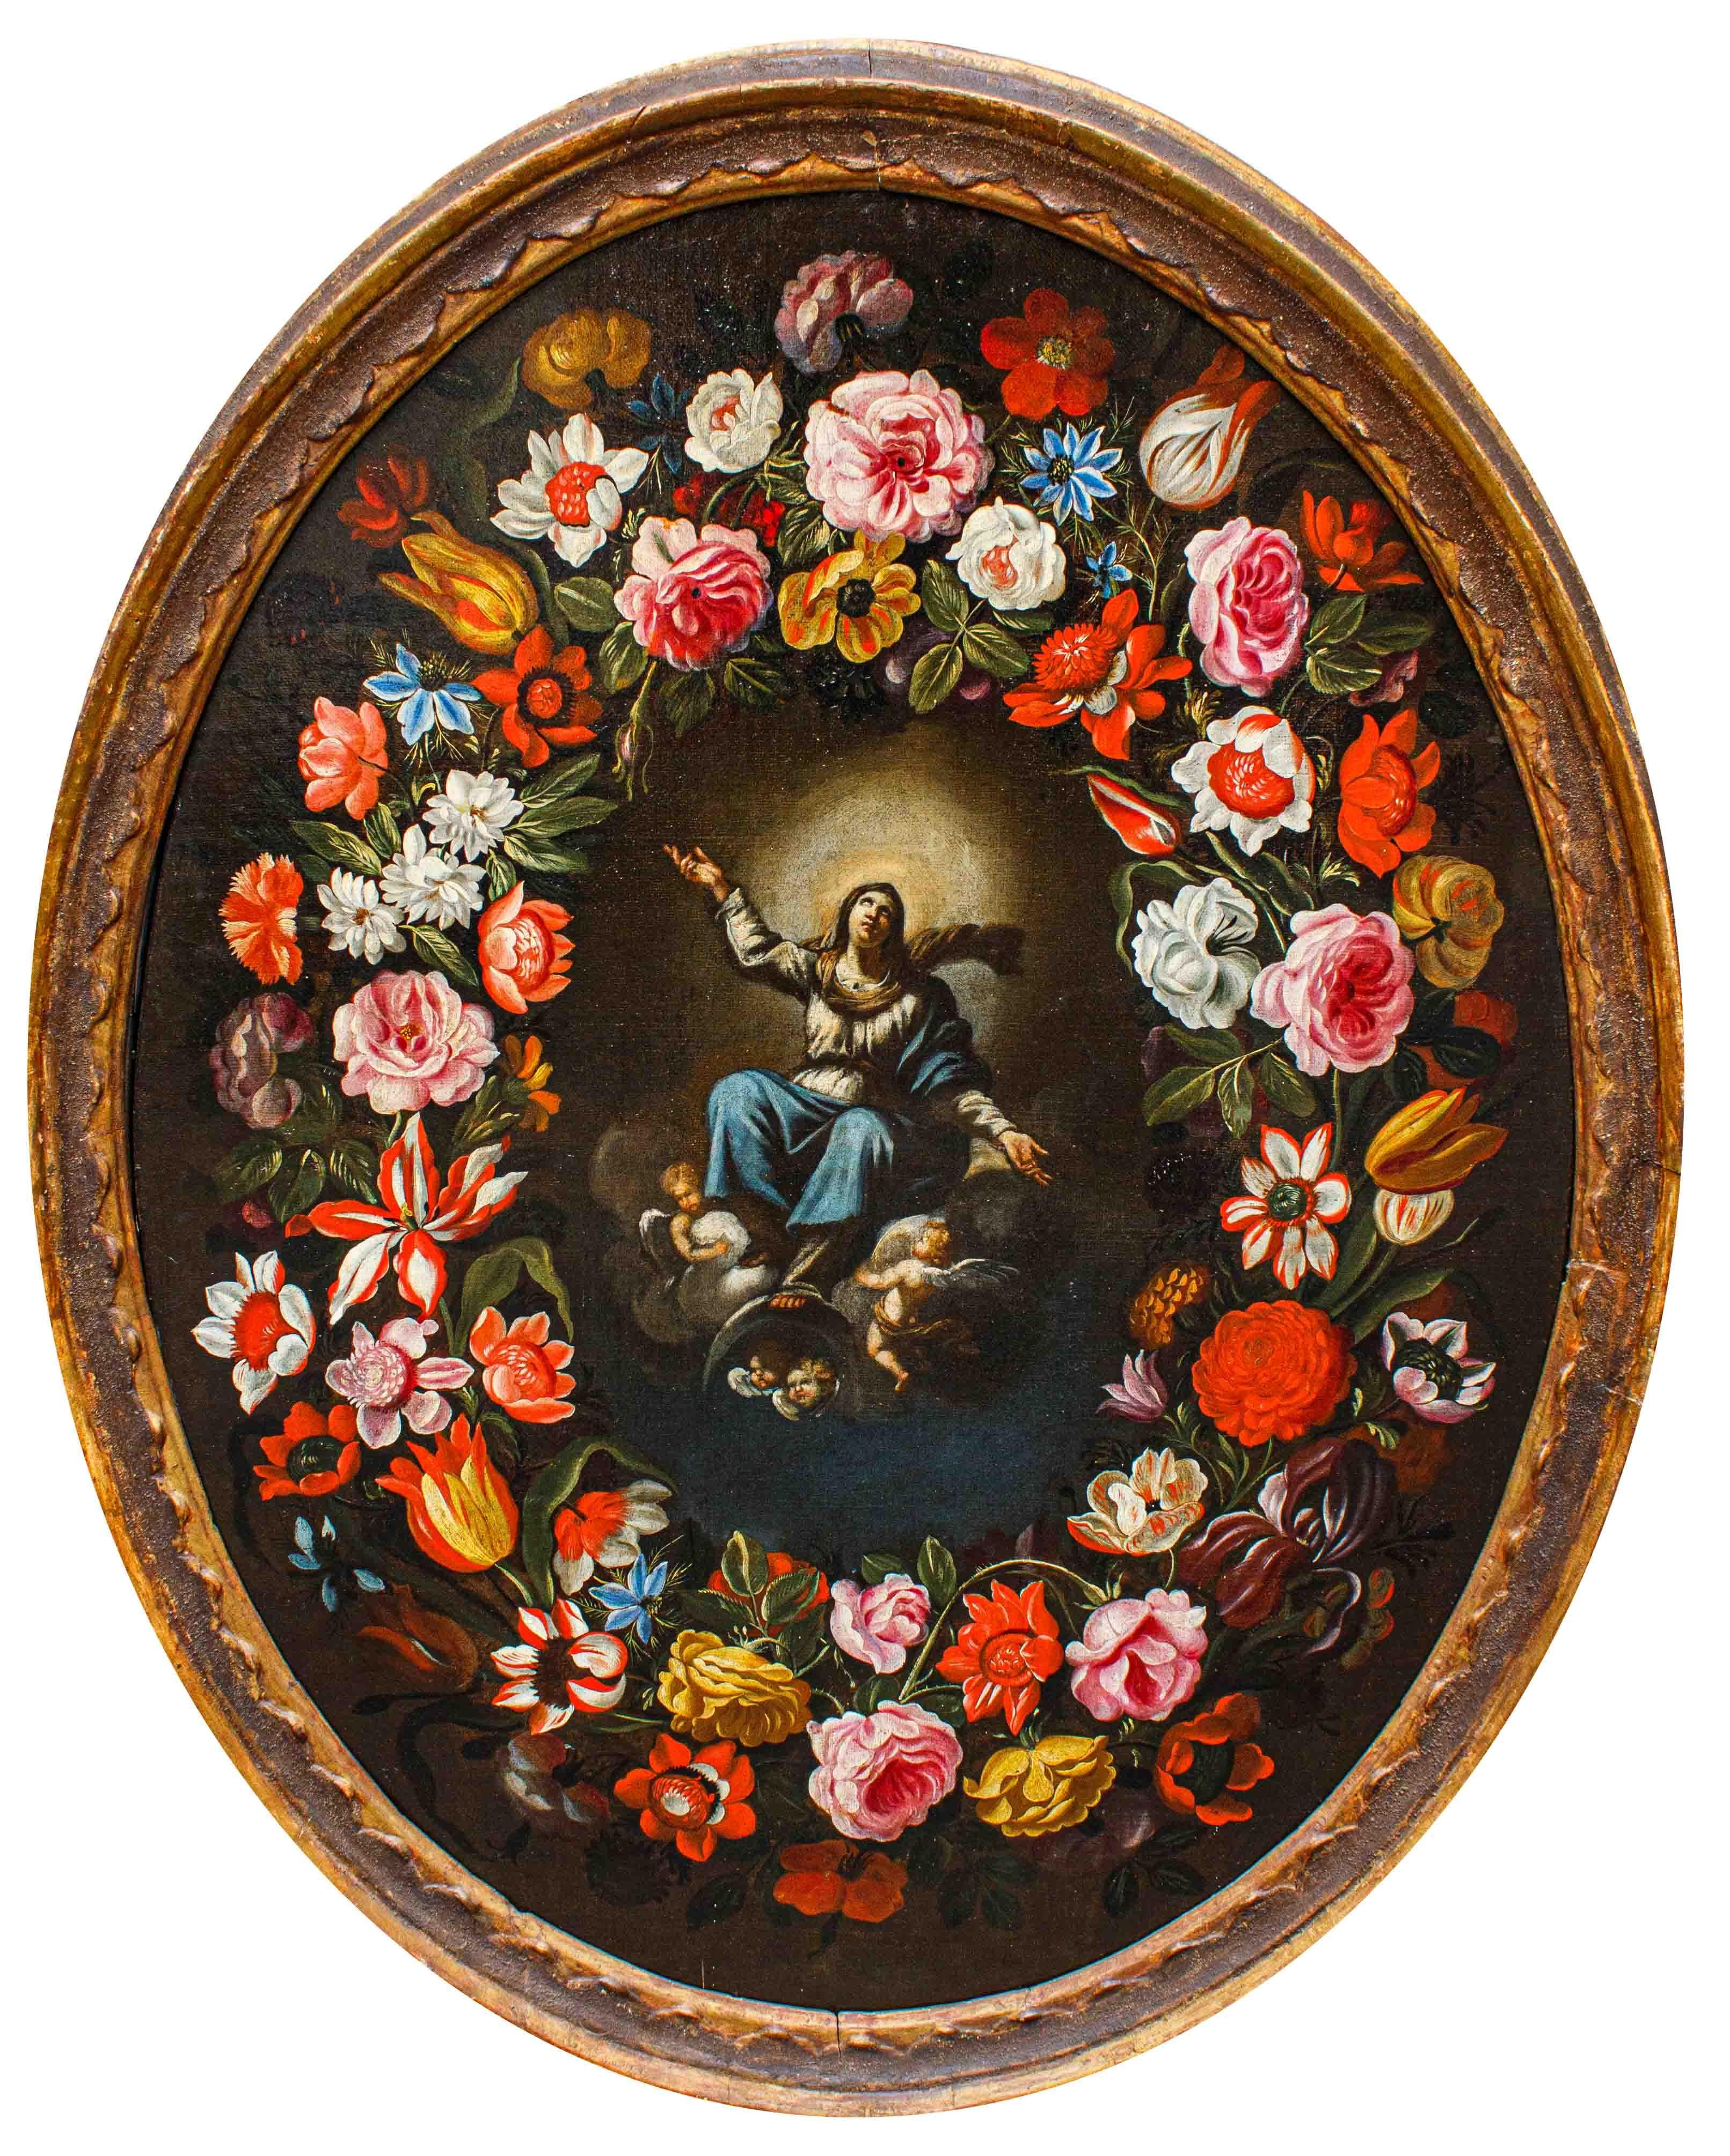 Giovanni Stanchi (Rome, 1608 - 1675) and Girolamo Pesci ( Rome 1679 - 1759)

Immaculate Madonna within floral garland

Oil on canvas, cm 95 x 72

Frame, cm 106 x 83

Expert opinion of Prof. Emilio Negro

The present painting is the result of a happy